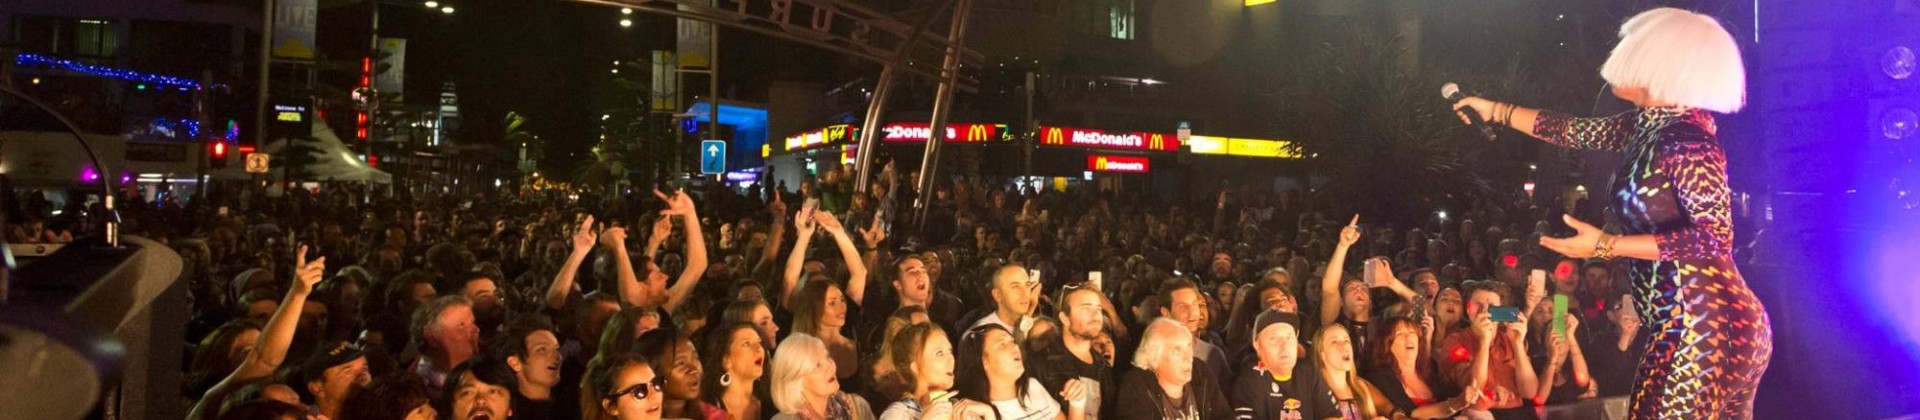 Surfers Paradise Live Free Music Event - 6 to 8 May 2016